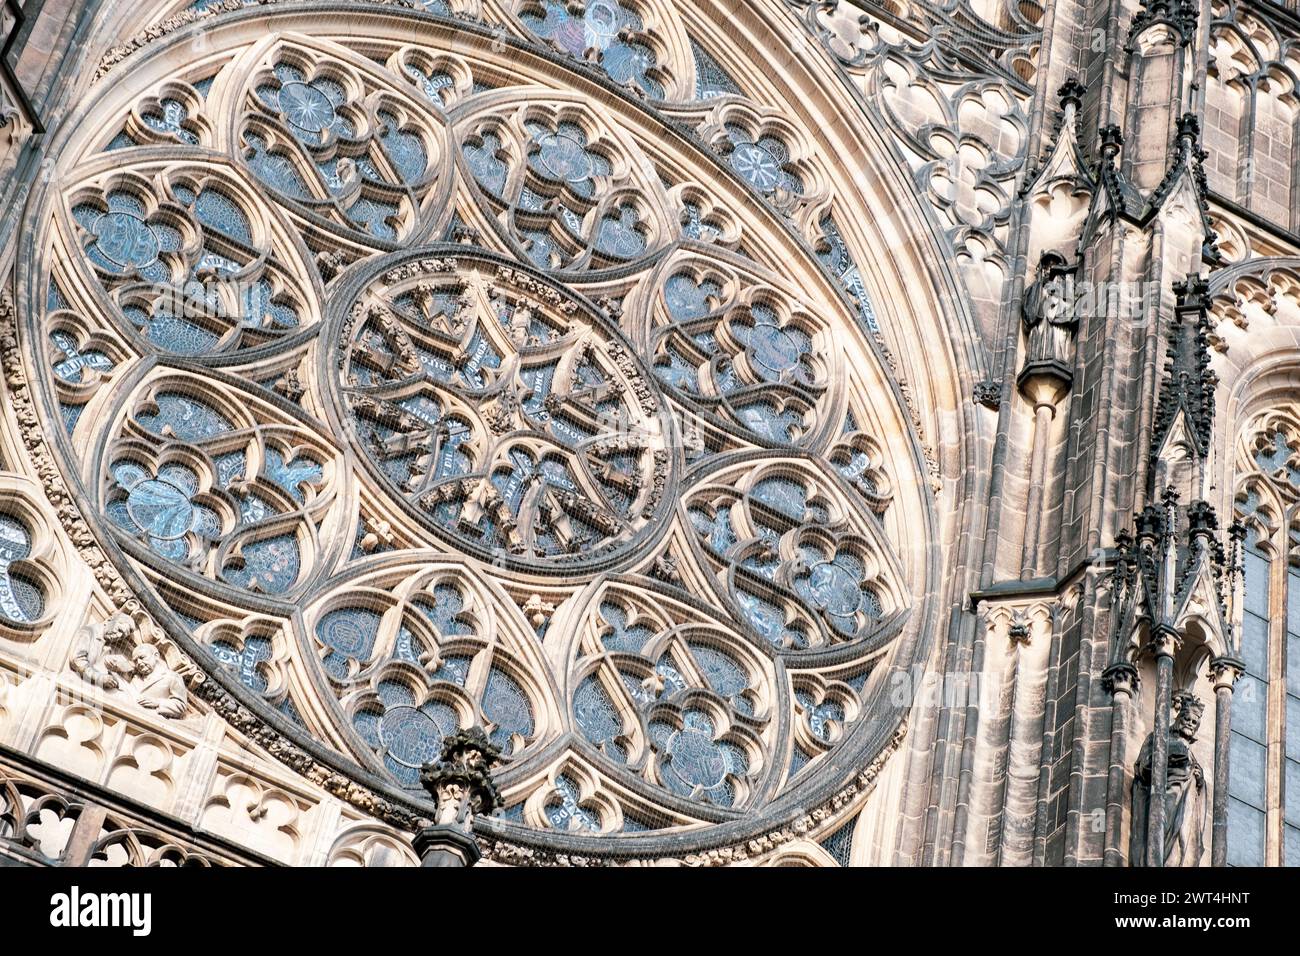 Gothic architecture featuring detailed stone carvings at cathedral entrance during daytime. Prague, Czech Republic Stock Photo